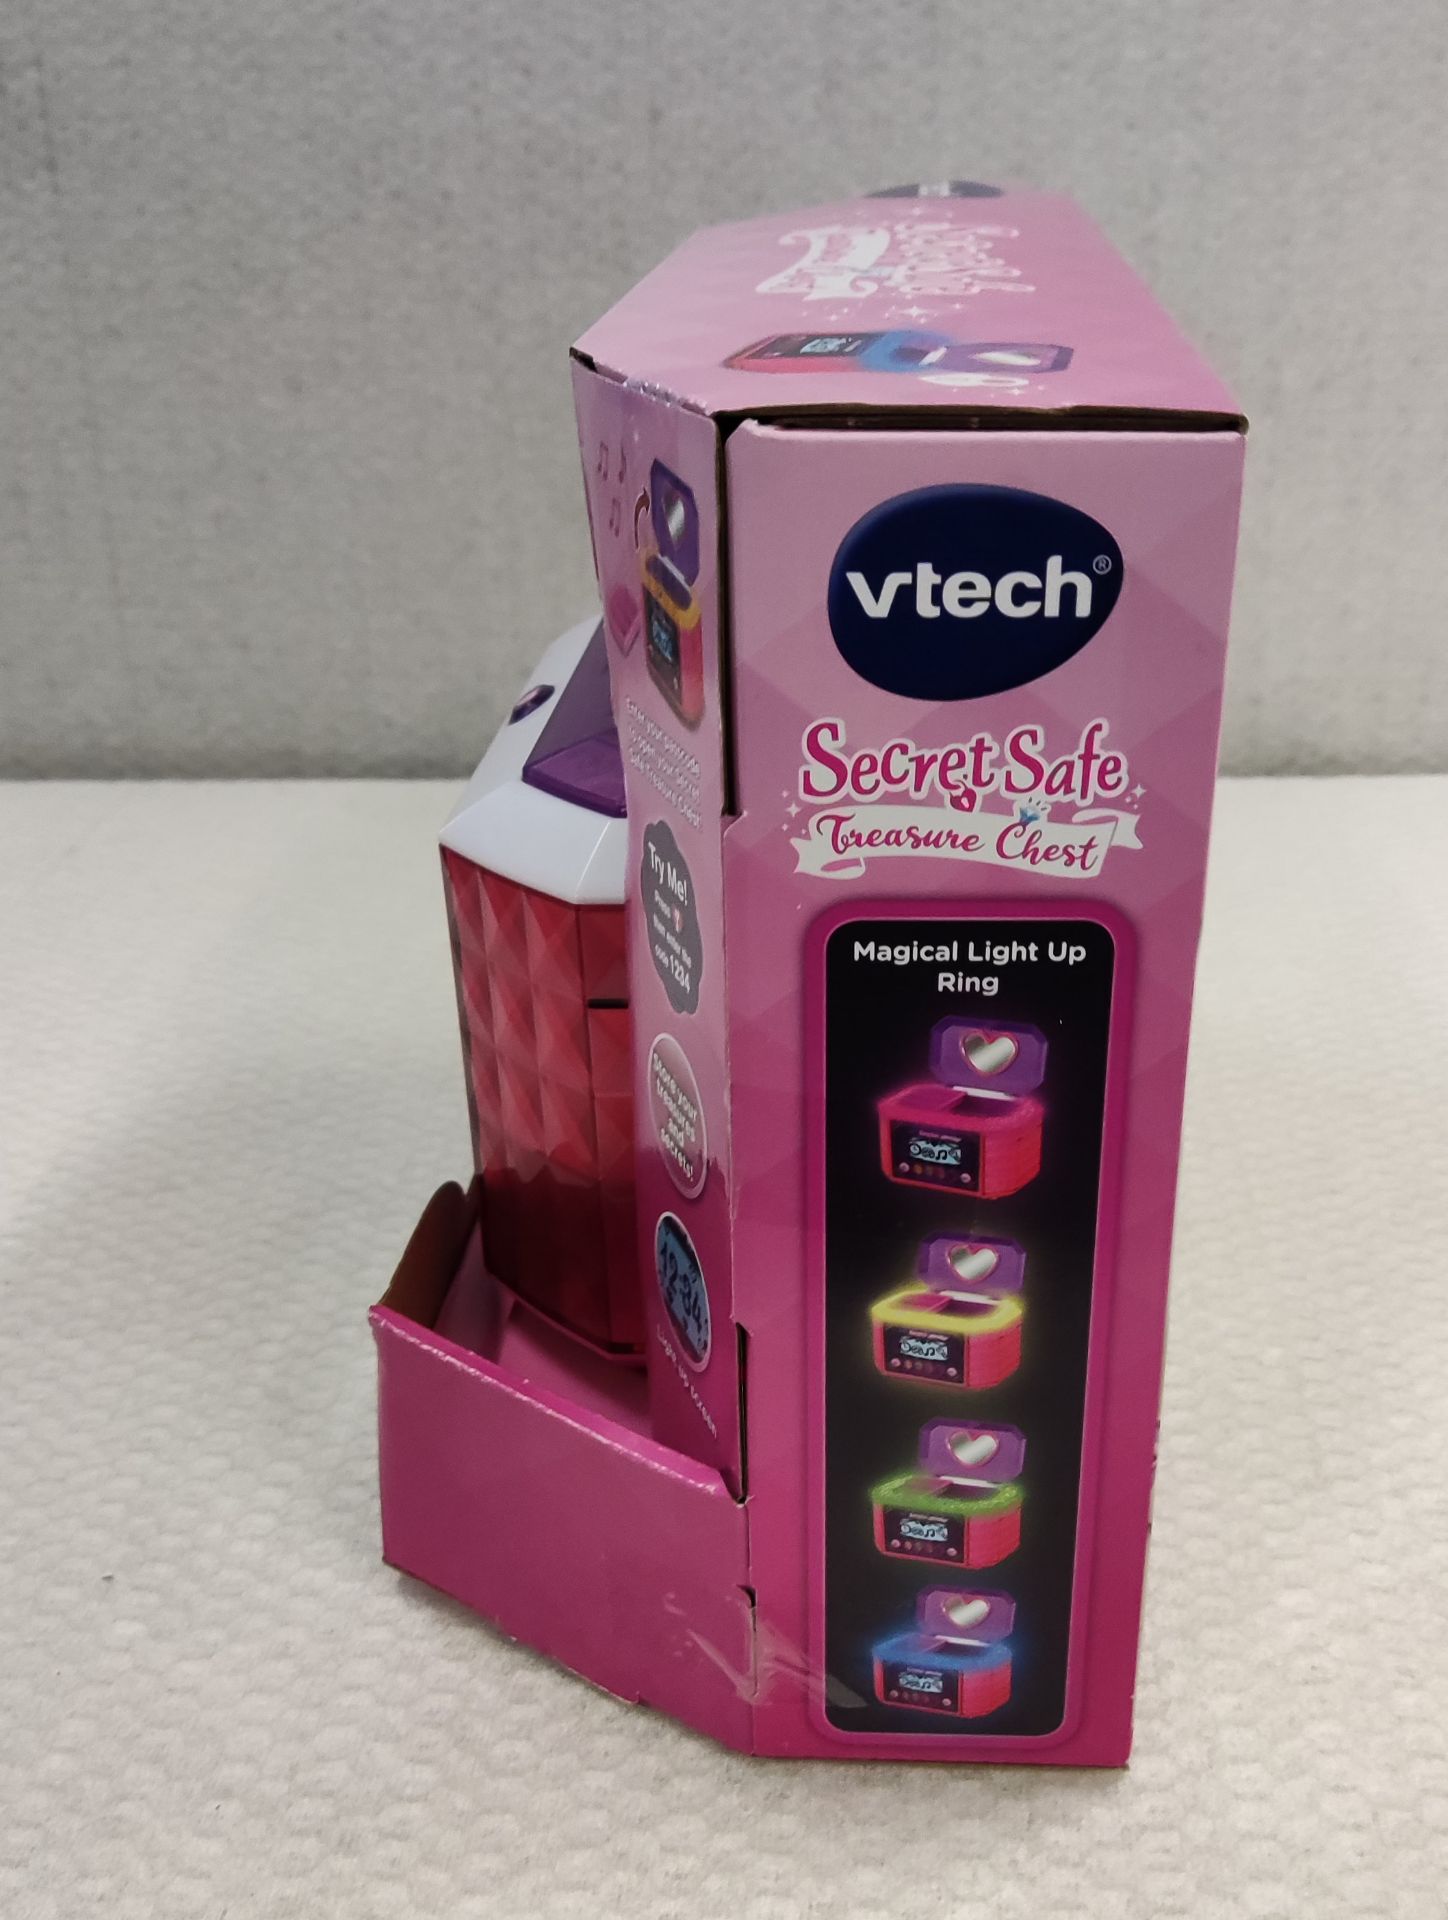 1 x Vtech 7-in-1 Secret Safe Treasure Chest - New/Boxed - Image 5 of 7